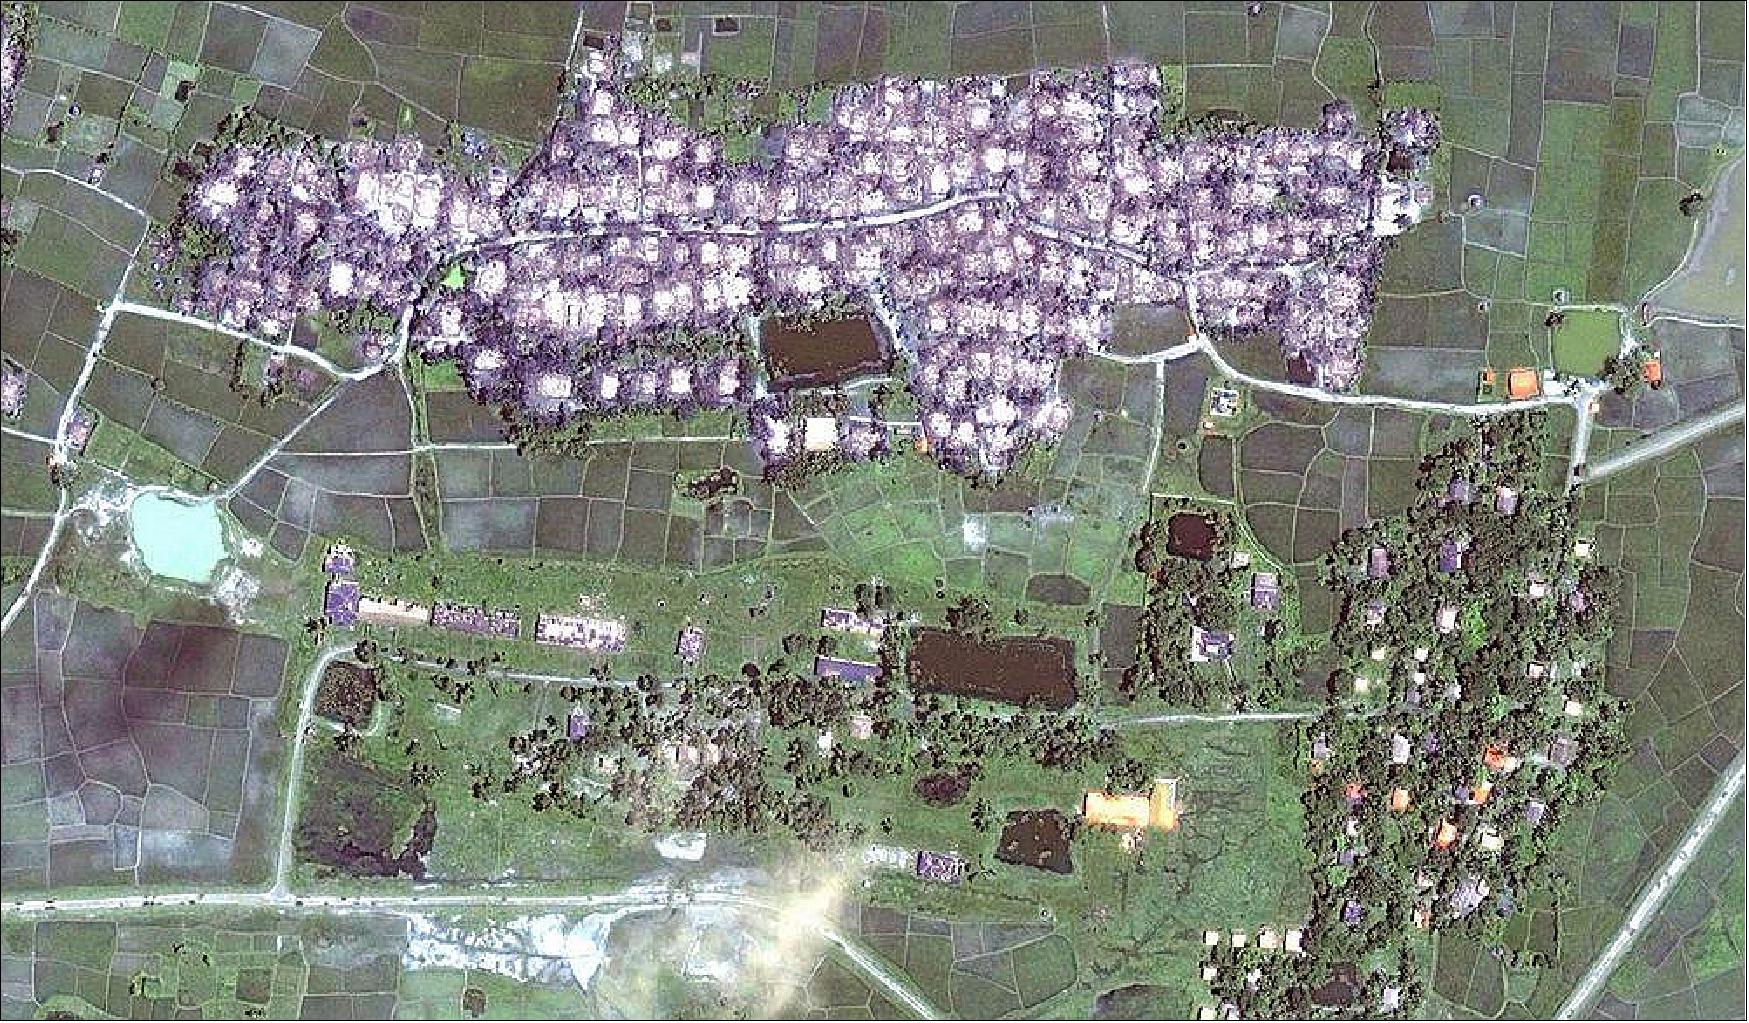 Figure 32: Complete destruction of Rohingya villages in close proximity to an intact Rakhine village, Maungdaw township, recorded on 21 September 2017. Analysis by Human Rights Watch (image credit: Digital Globe)